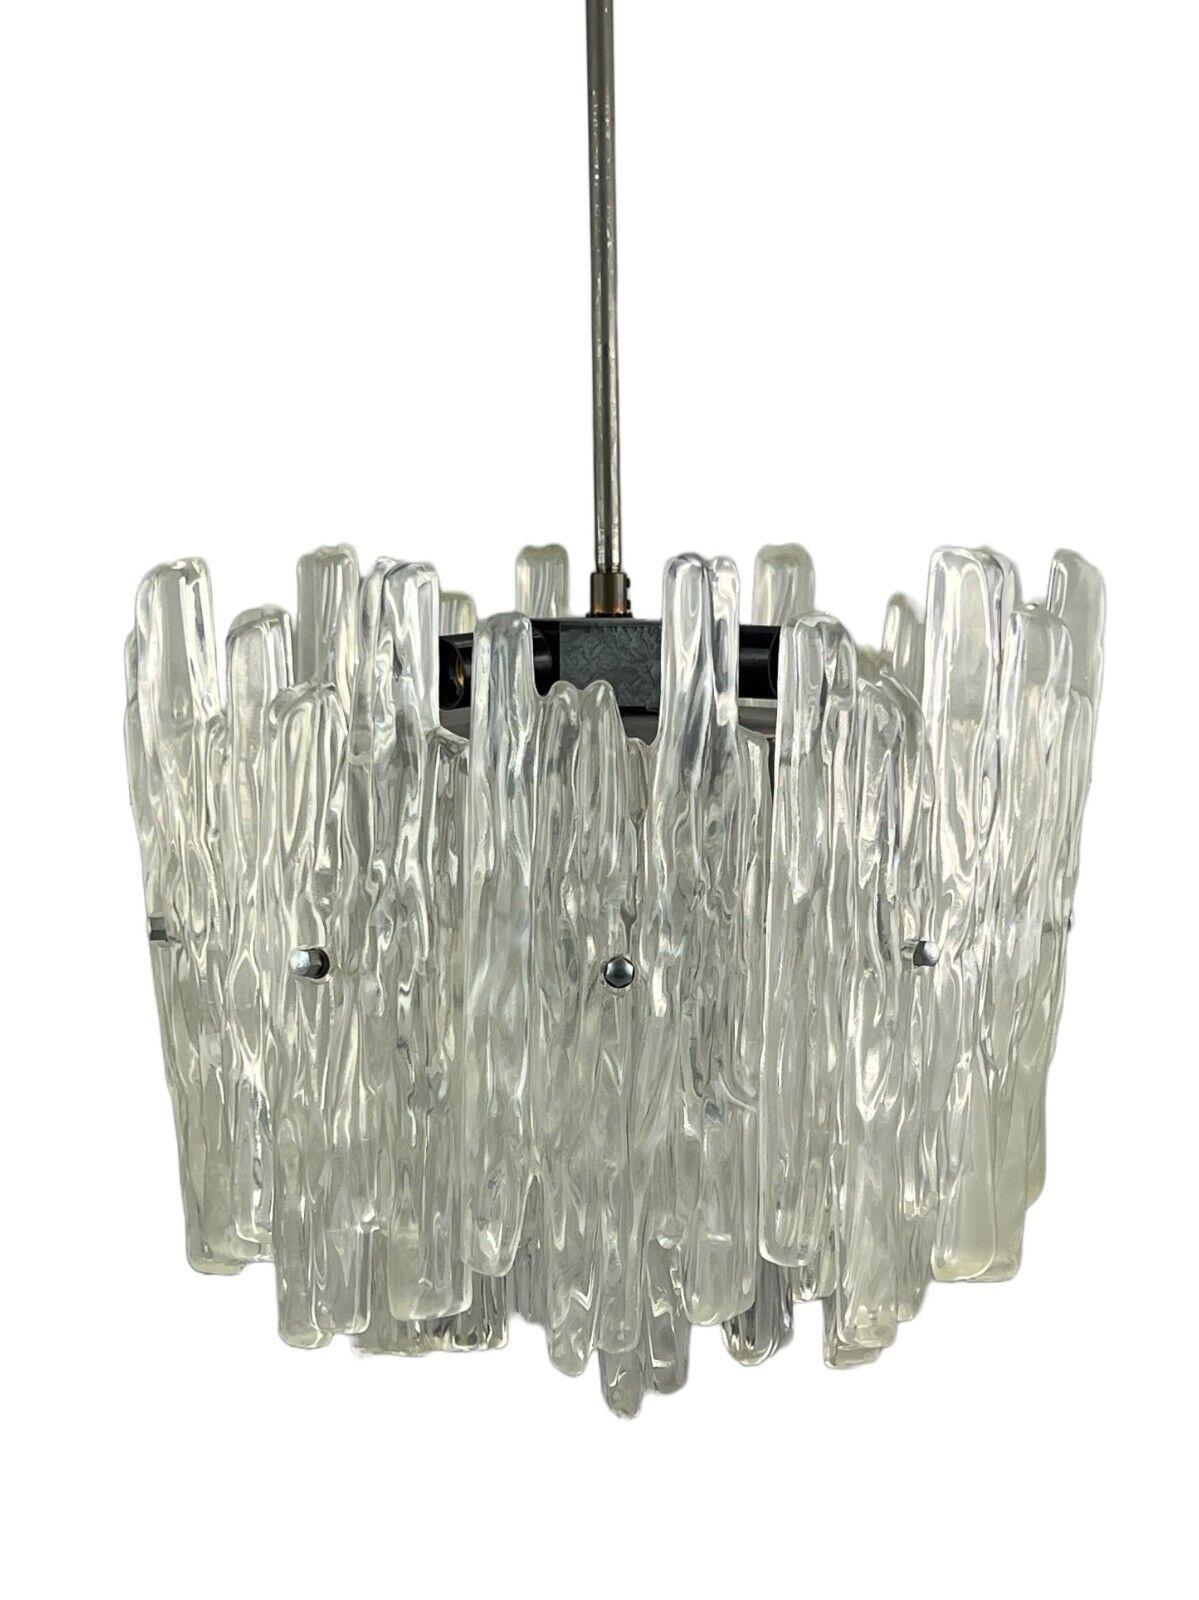 60s 70s lamp light ceiling lamp chandelier plastic space age

Object: chandelier

Manufacturer:

Condition: good - vintage

Age: around 1960-1970

Dimensions:

Diameter = 36cm
Height = 80cm

Other notes:

3x E14 socket & 1x E27